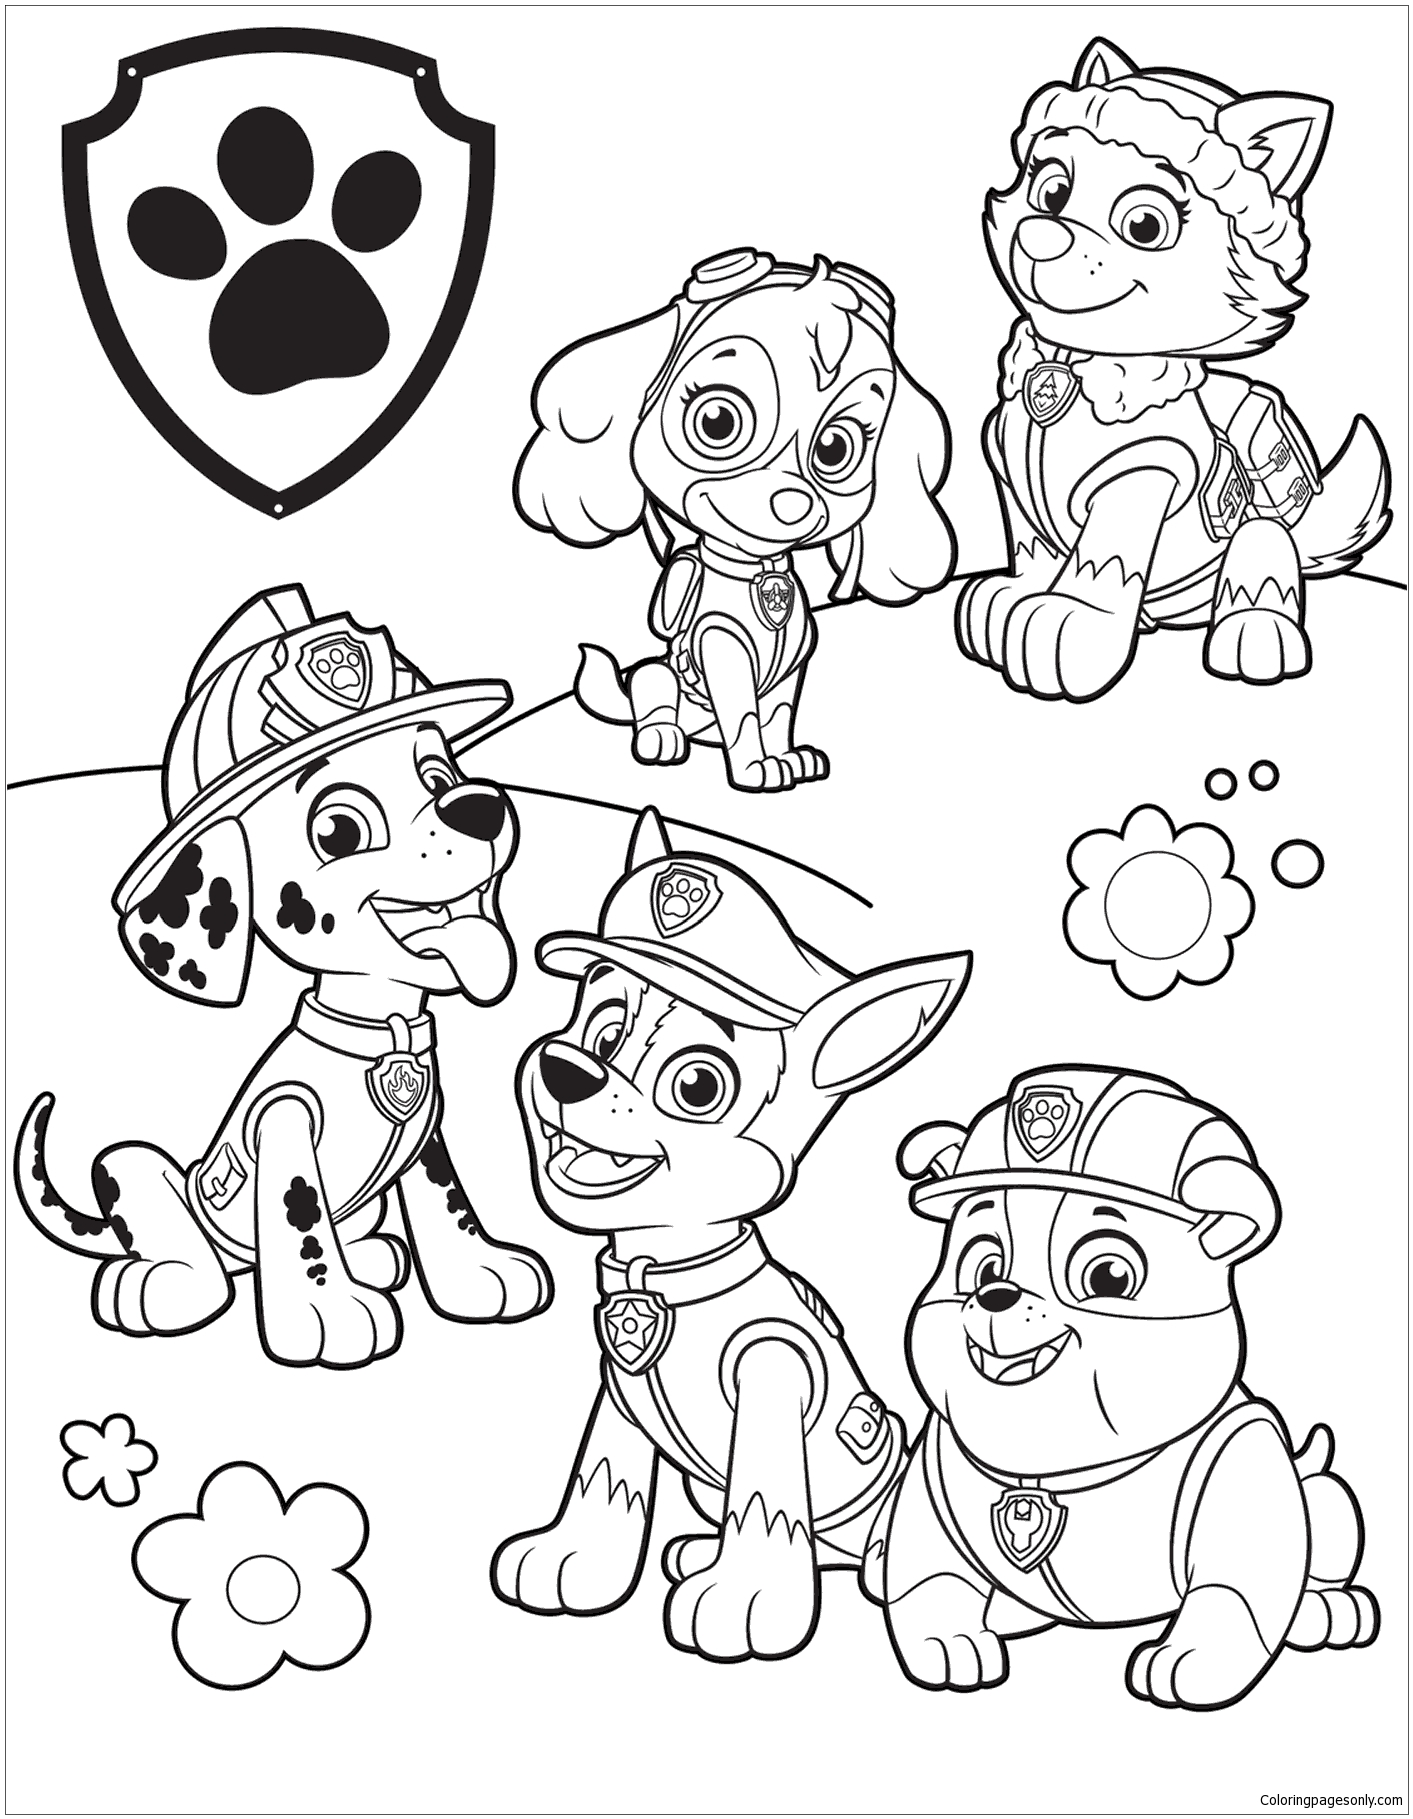 Paw Patrol 39 Coloring Page - Free Coloring Pages Online